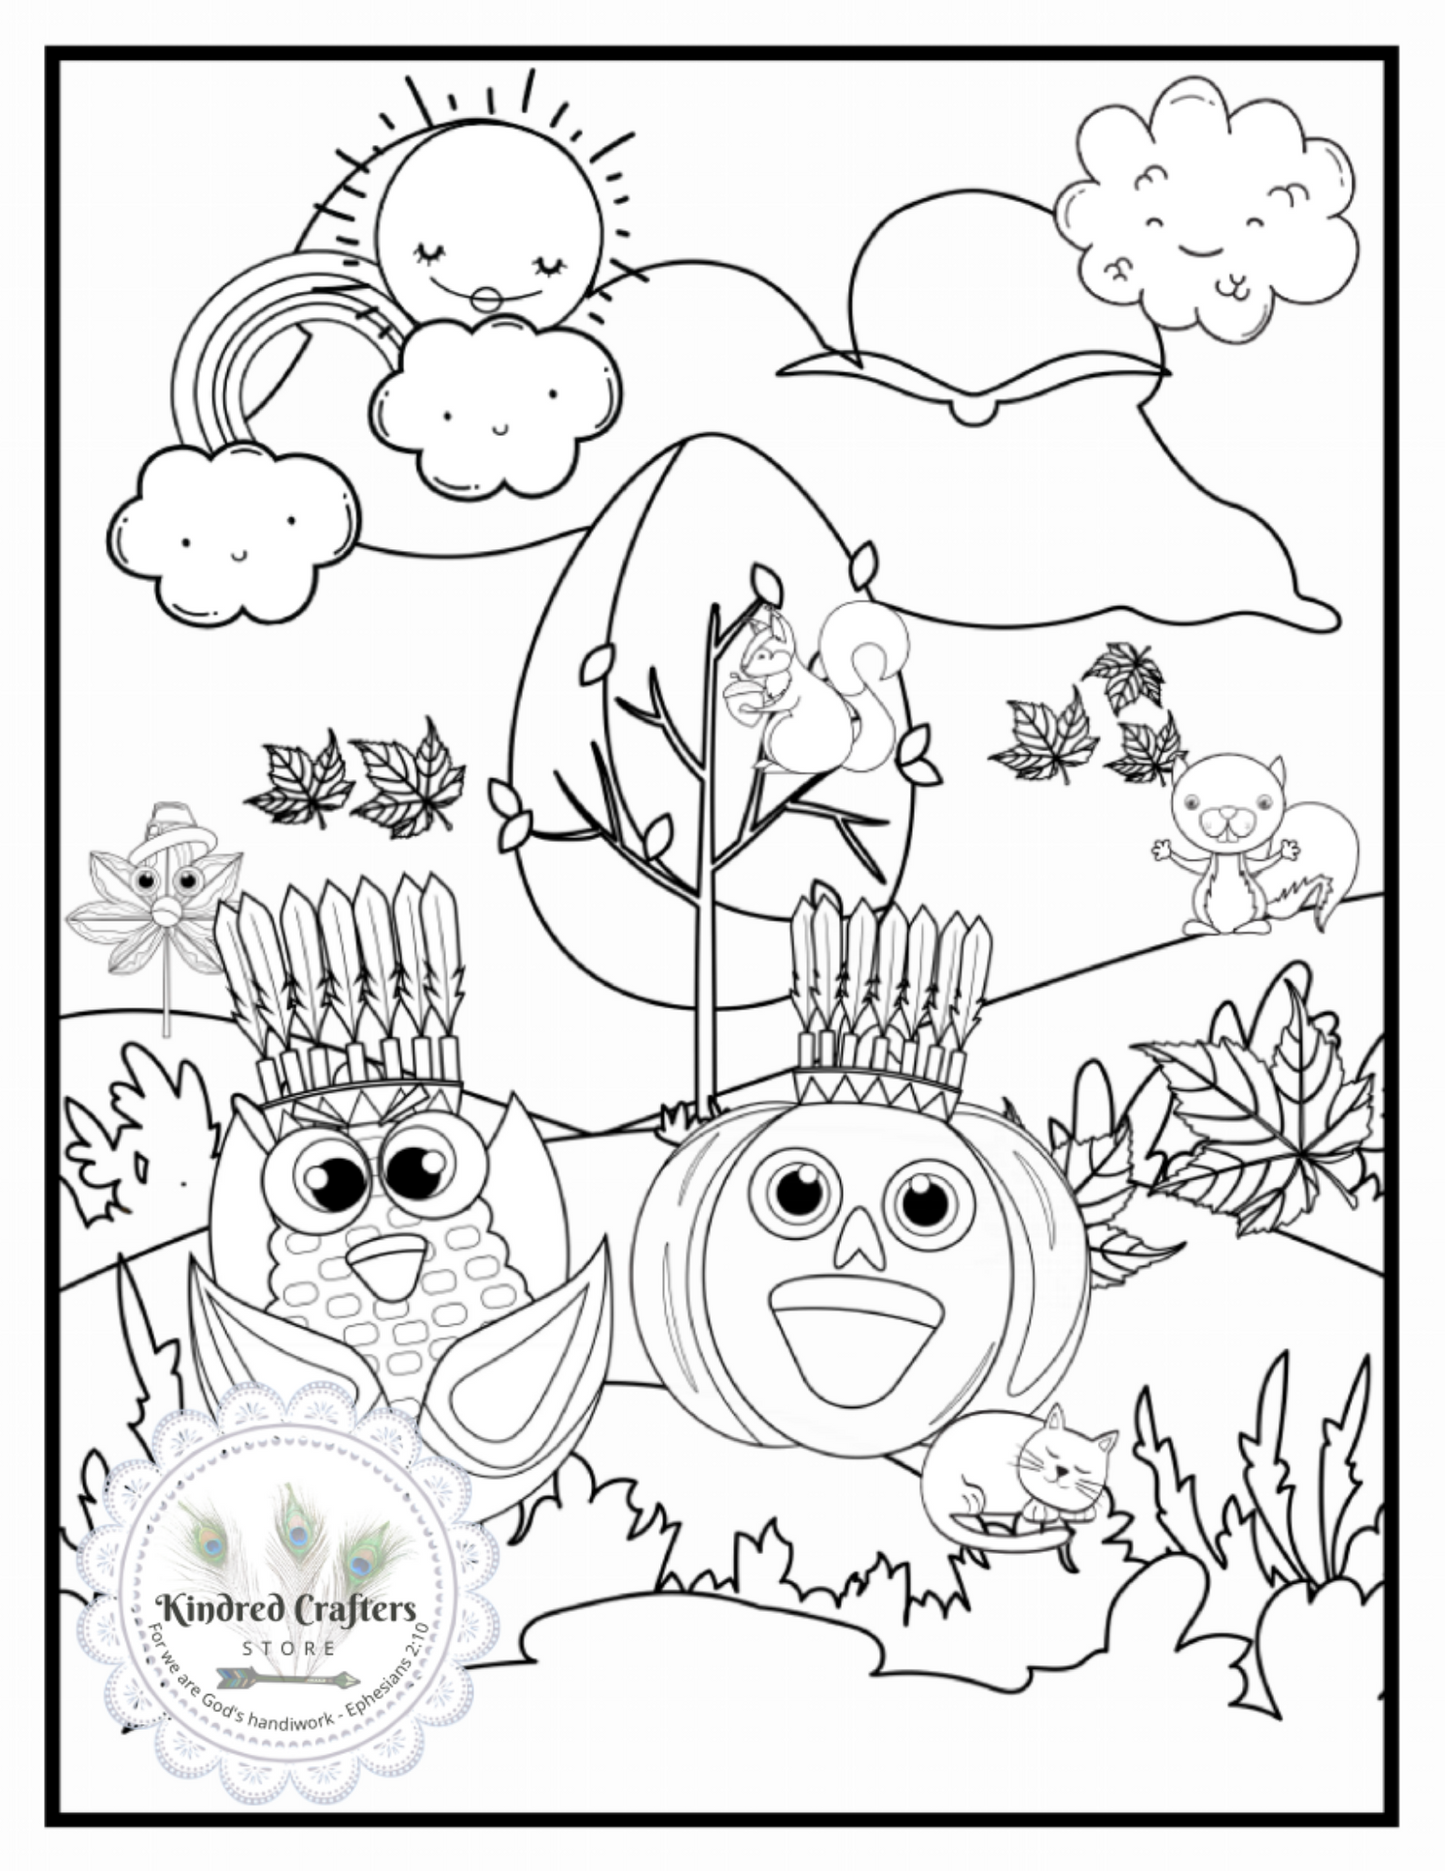 THANKSGIVING ACTIVITY AND COLORING BOOK